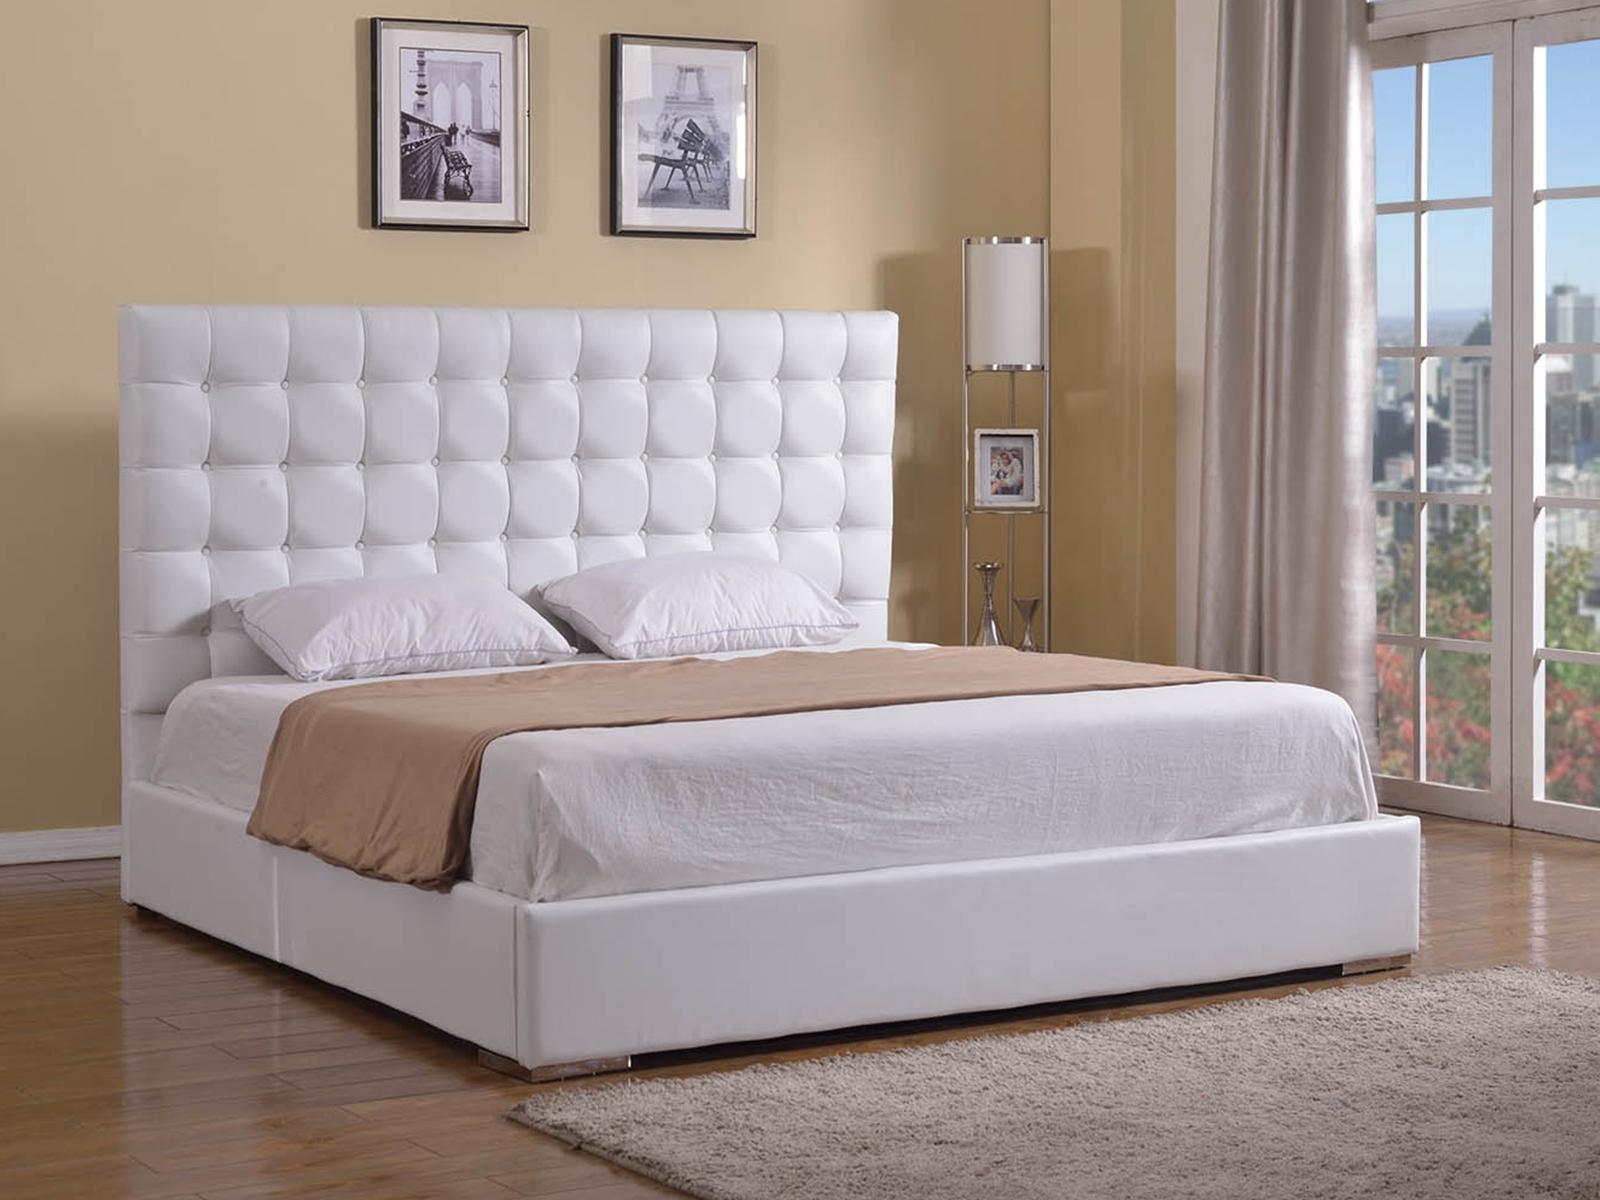 Contemporary, Modern Platform Bed BELLA CB-A016BD-KW in White Eco-Leather